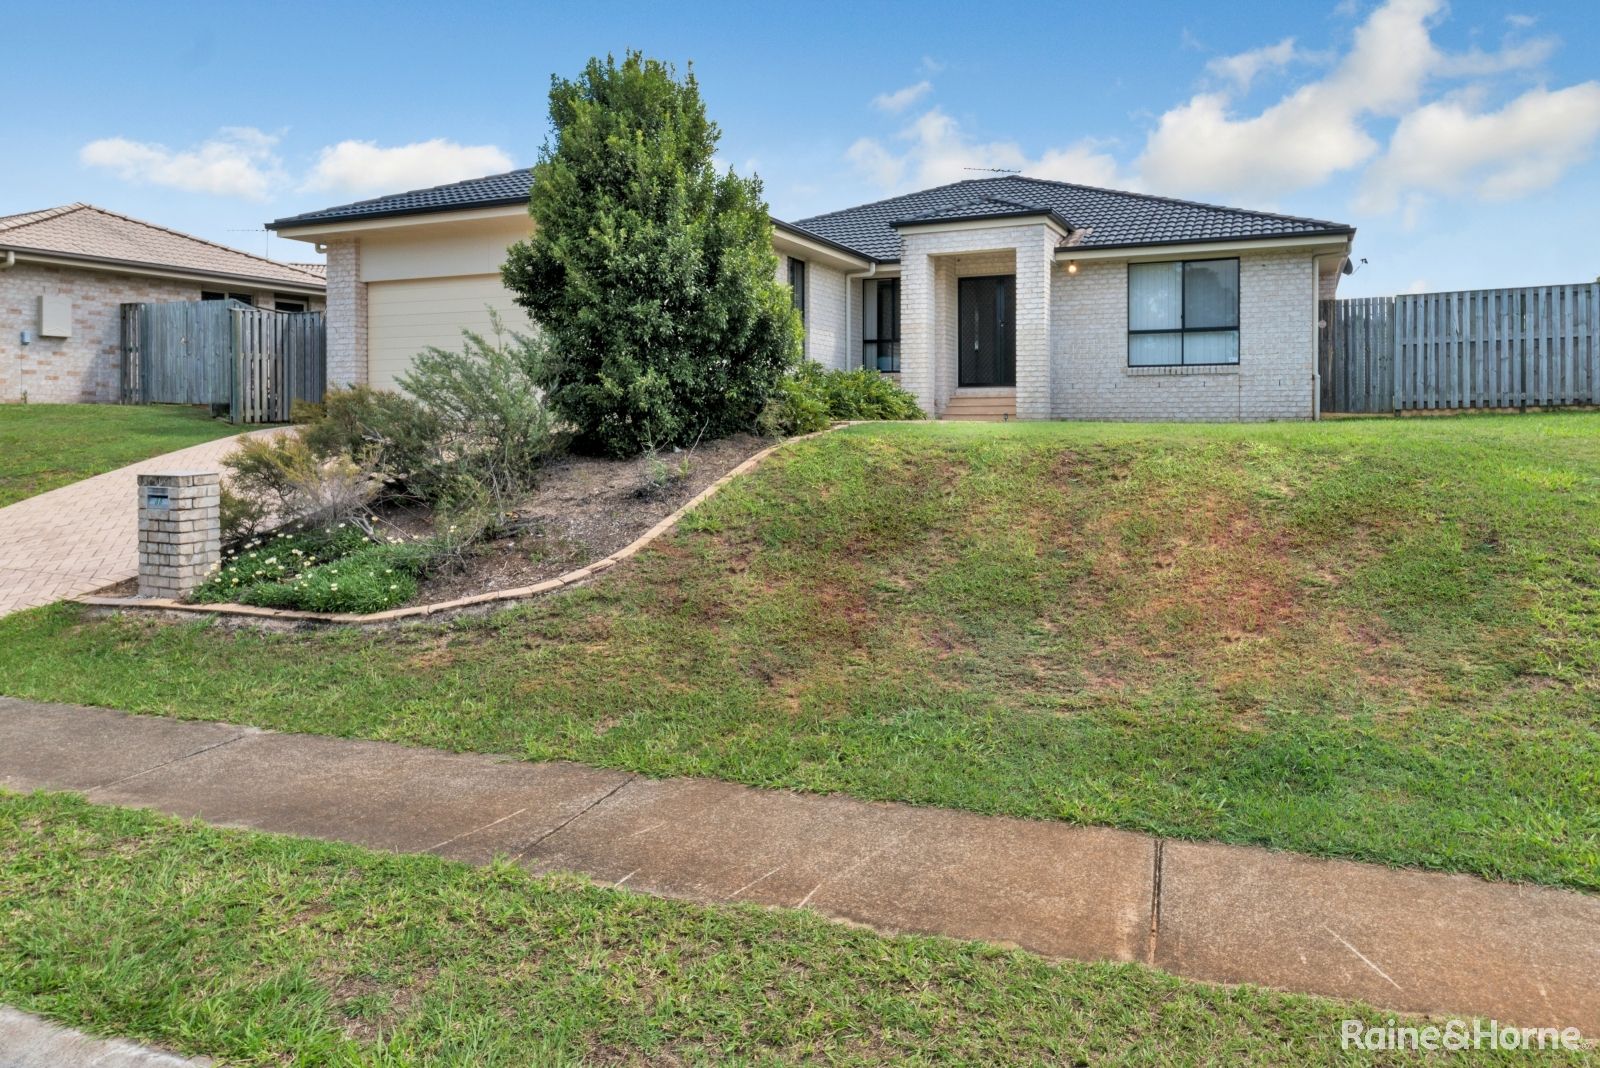 35 MAYES CIRCUIT, Caboolture QLD 4510, Image 0